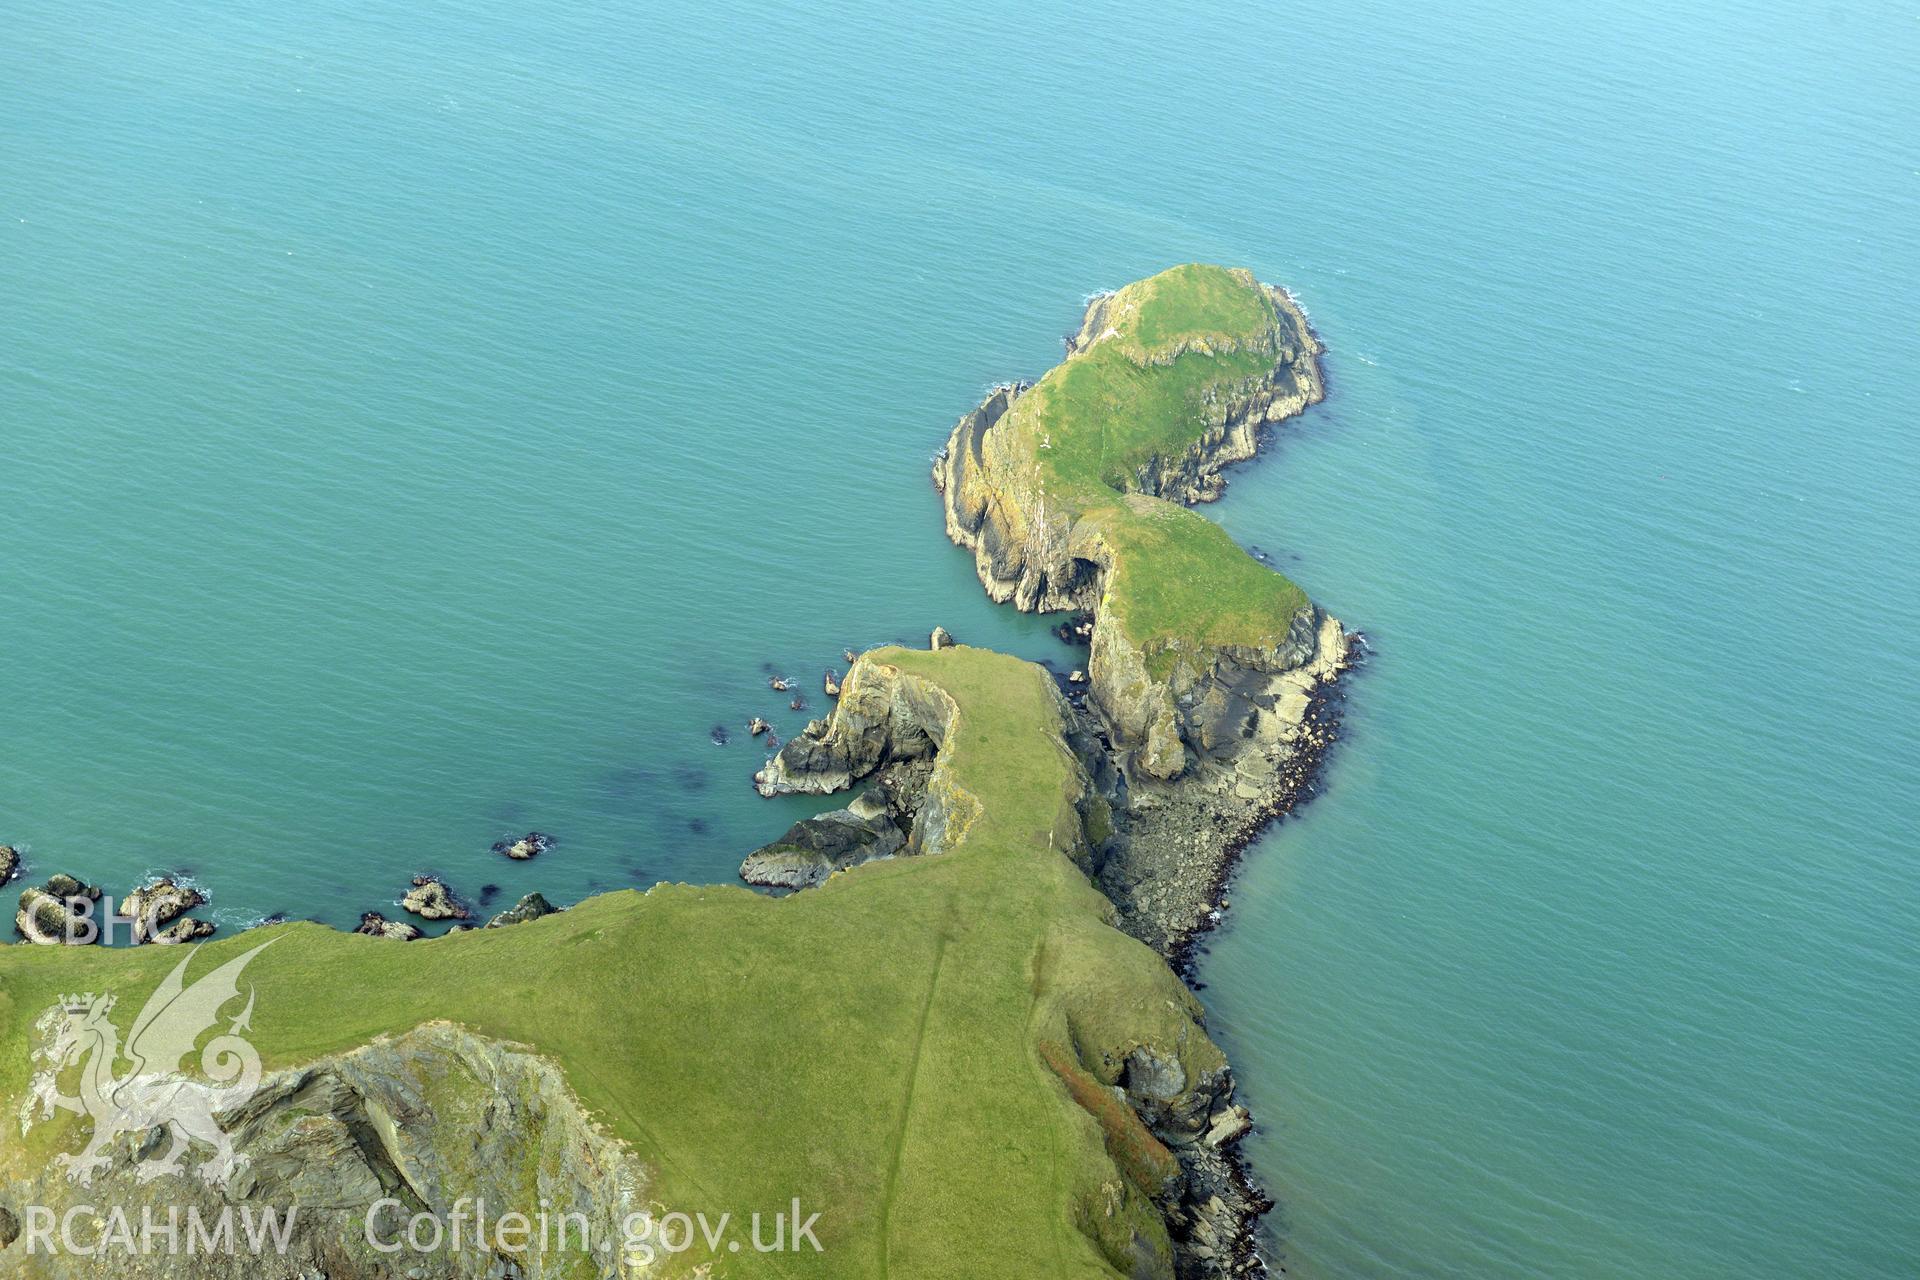 Royal Commission aerial photograph of Ynys Lochtyn taken on 27th March 2017. Baseline aerial reconnaissance survey for the CHERISH Project. ? Crown: CHERISH PROJECT 2017. Produced with EU funds through the Ireland Wales Co-operation Programme 2014-2020. All material made freely available through the Open Government Licence.